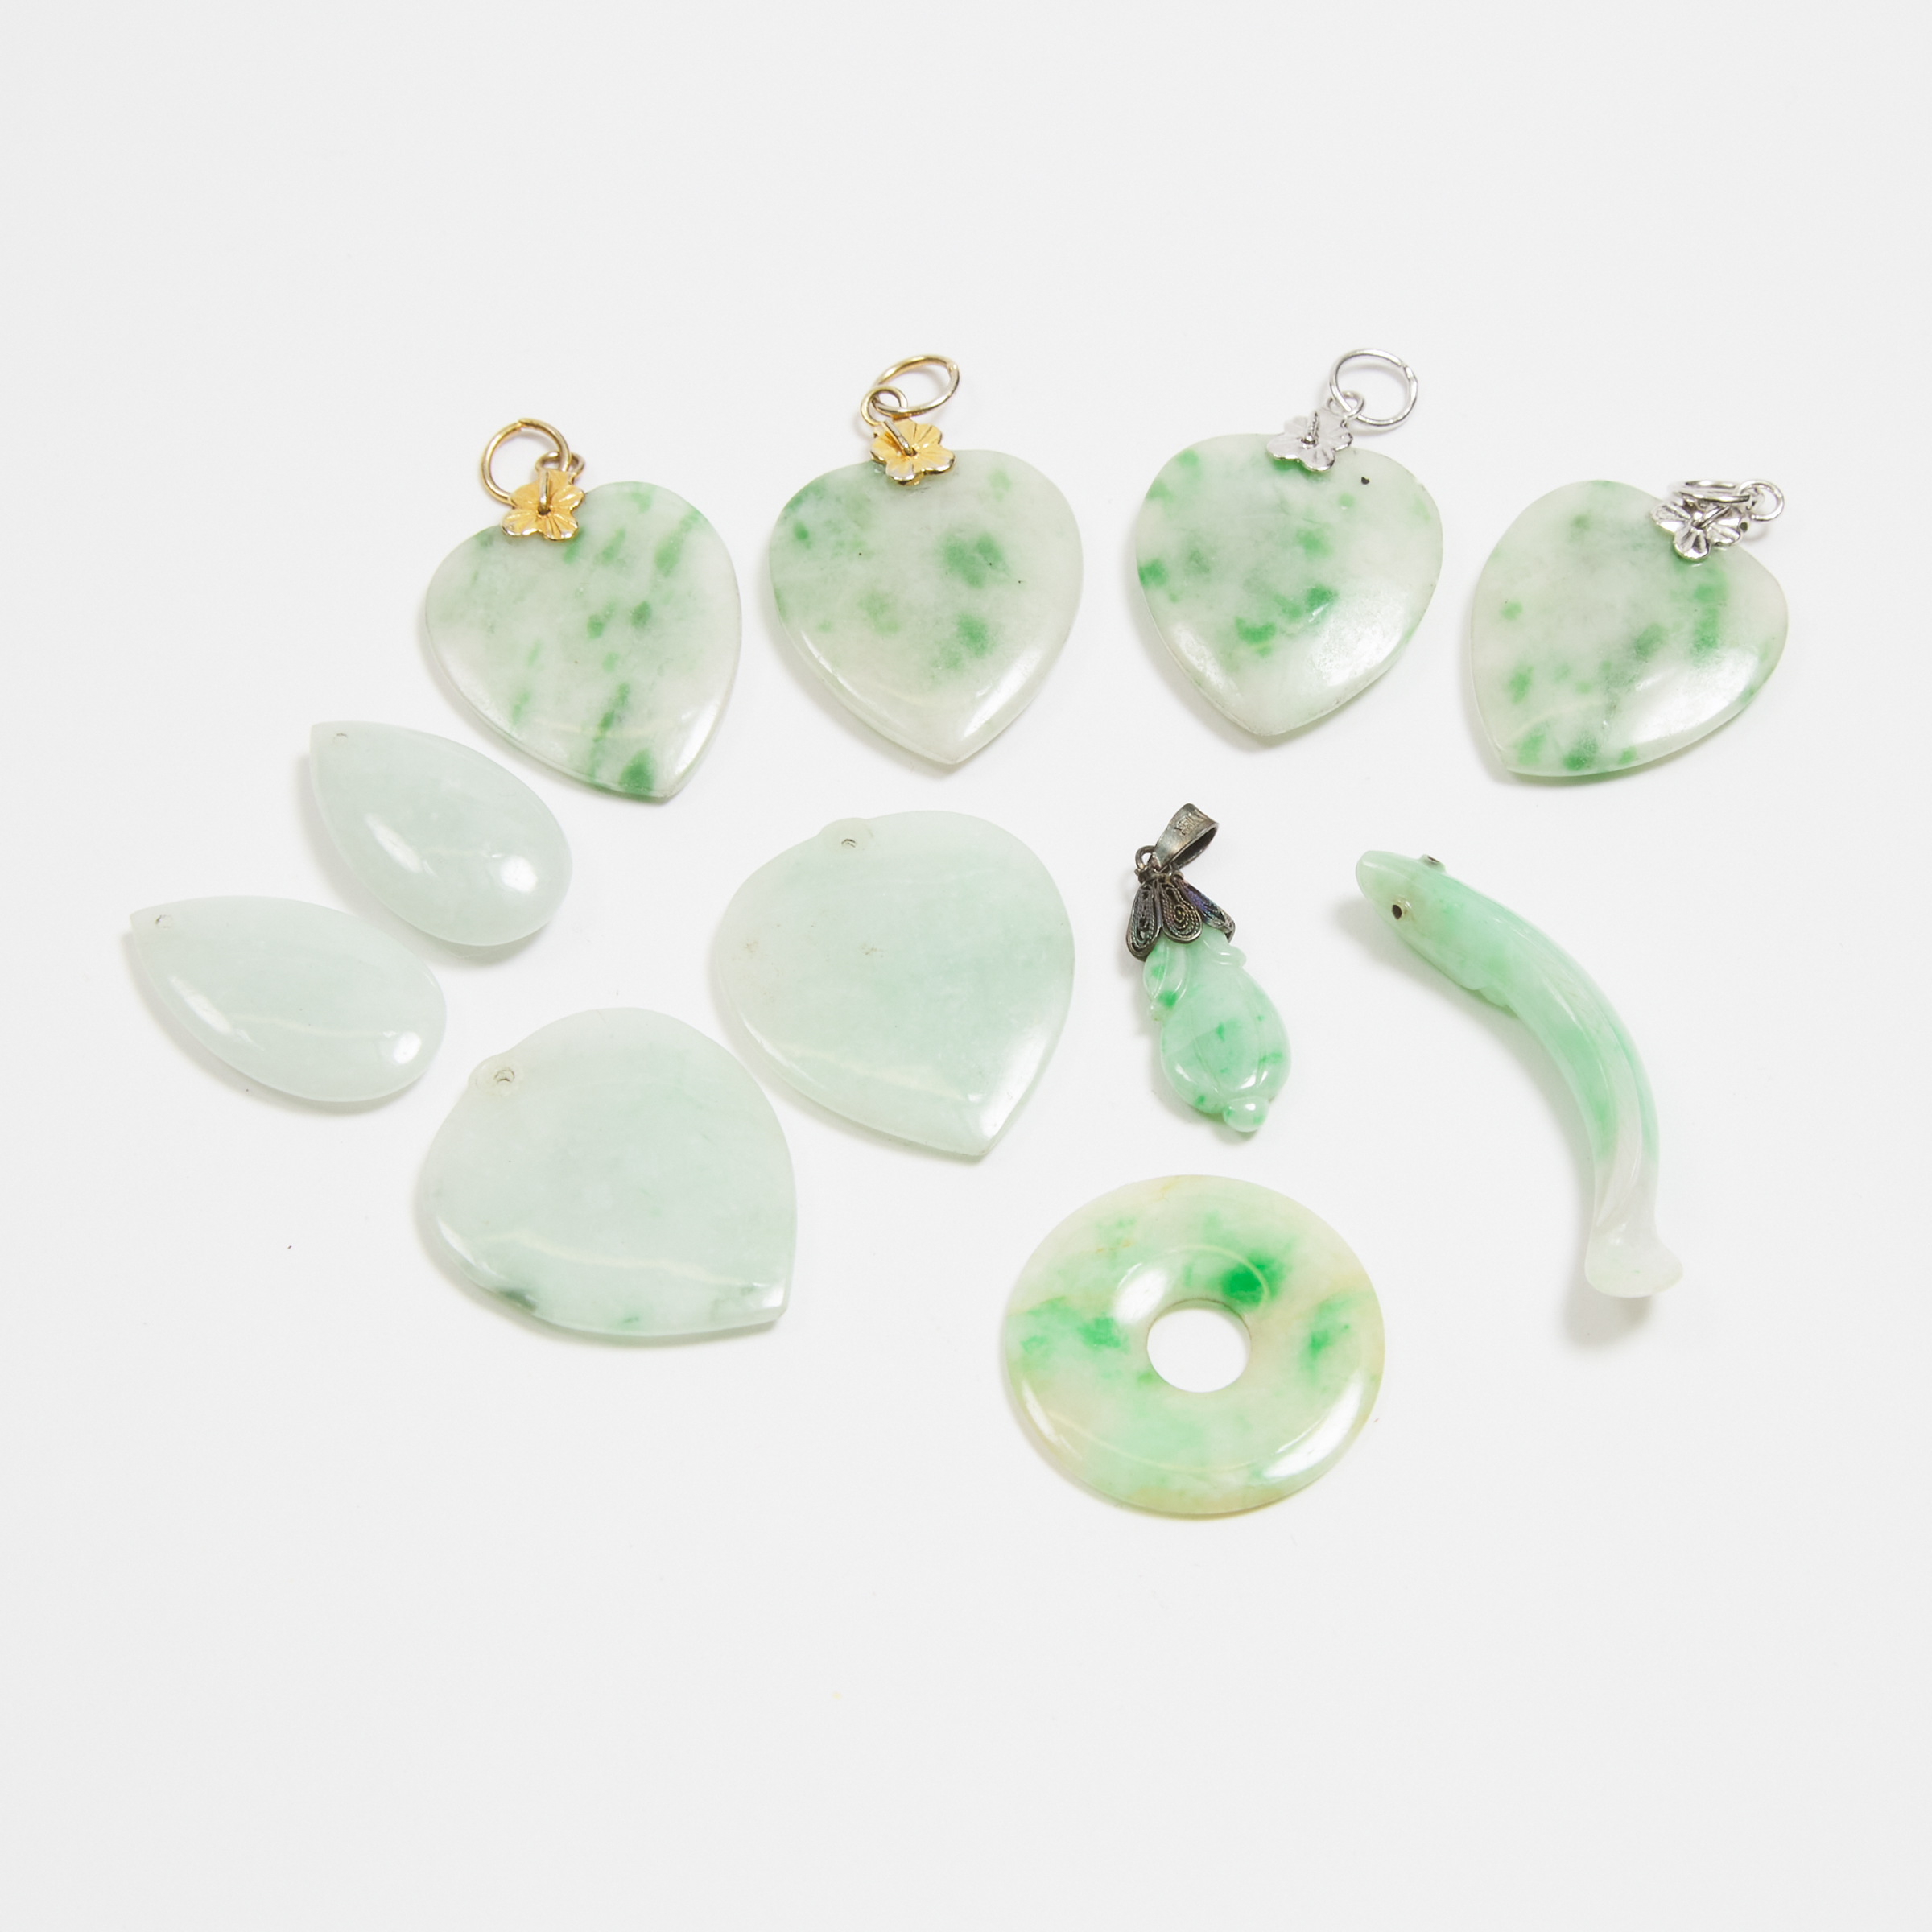 A Group of Eleven Jadeite Pendants, Early to Mid 20th Century